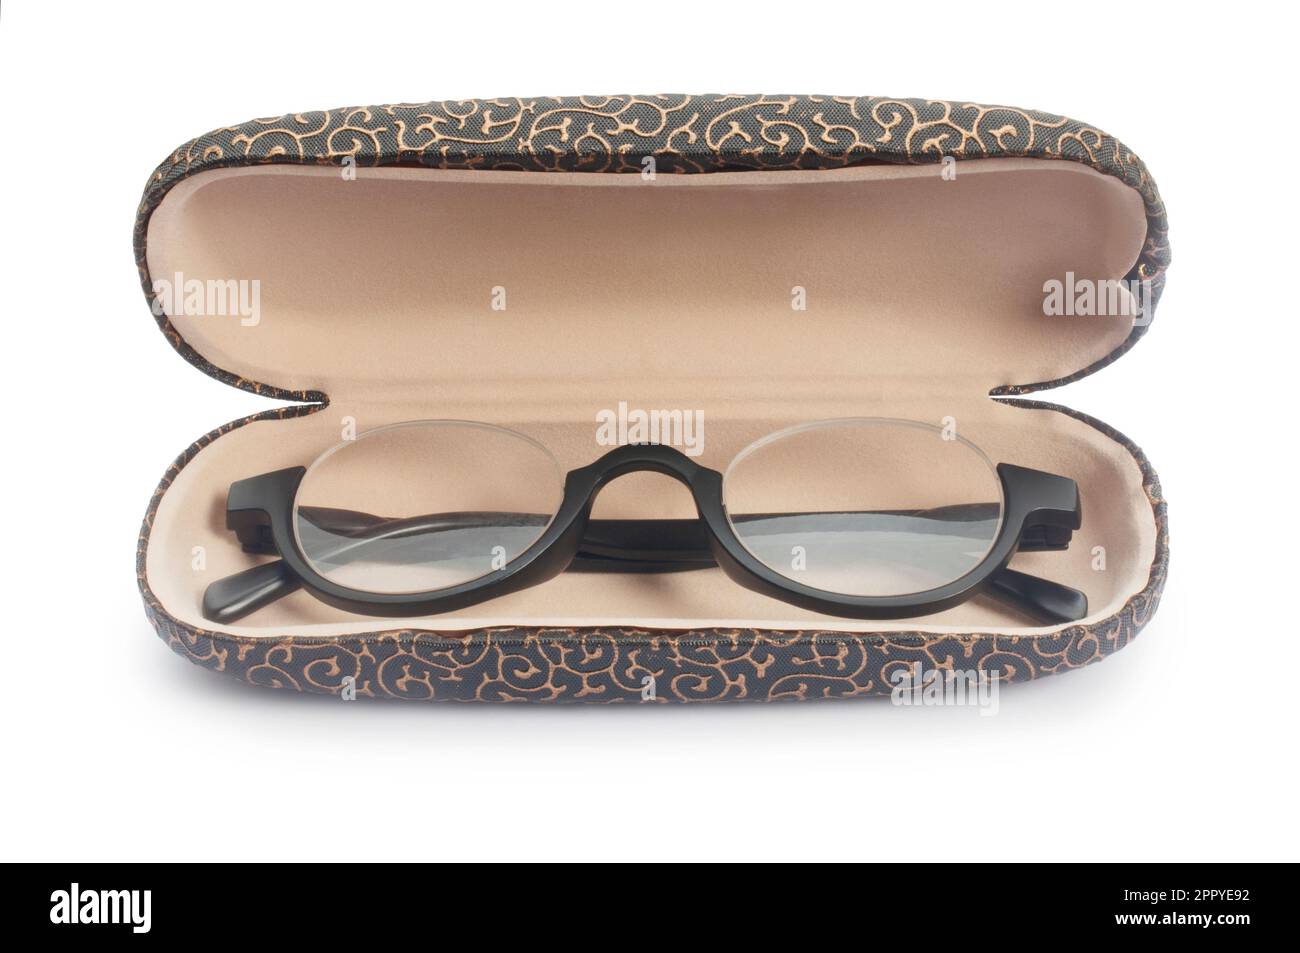 Studio shot of a pair of glasses with case cut out against a white background - John Gollop Stock Photo